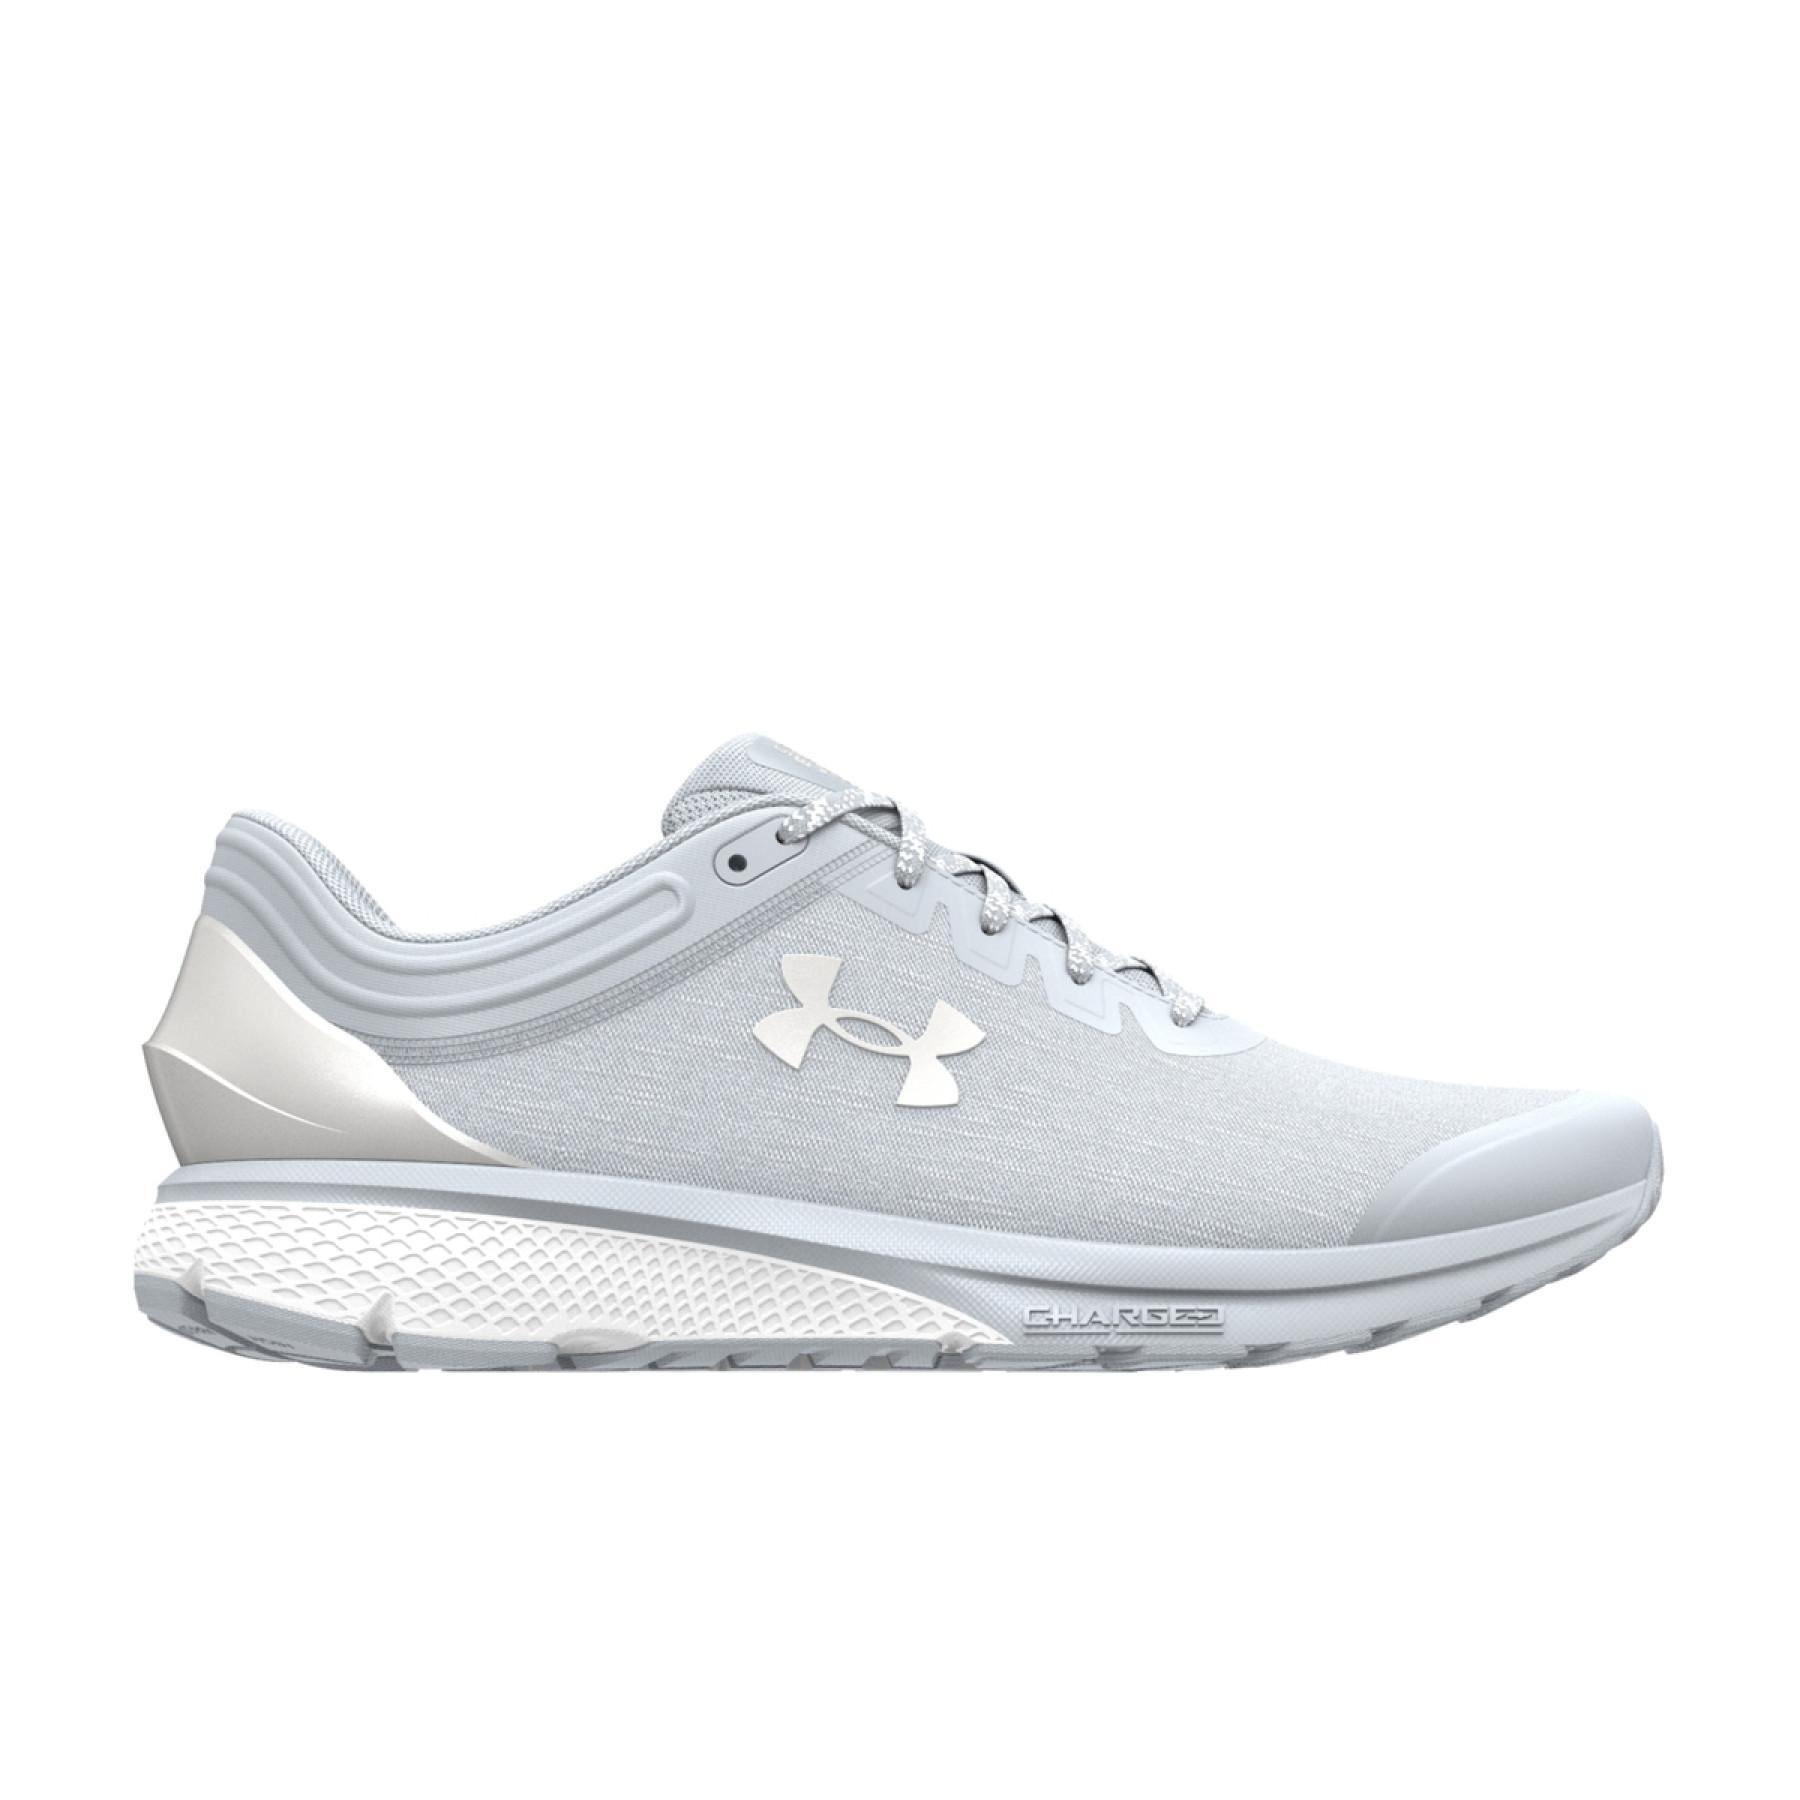 Chaussures de running femme Under Armour Charged Escape 3 EVO Charm